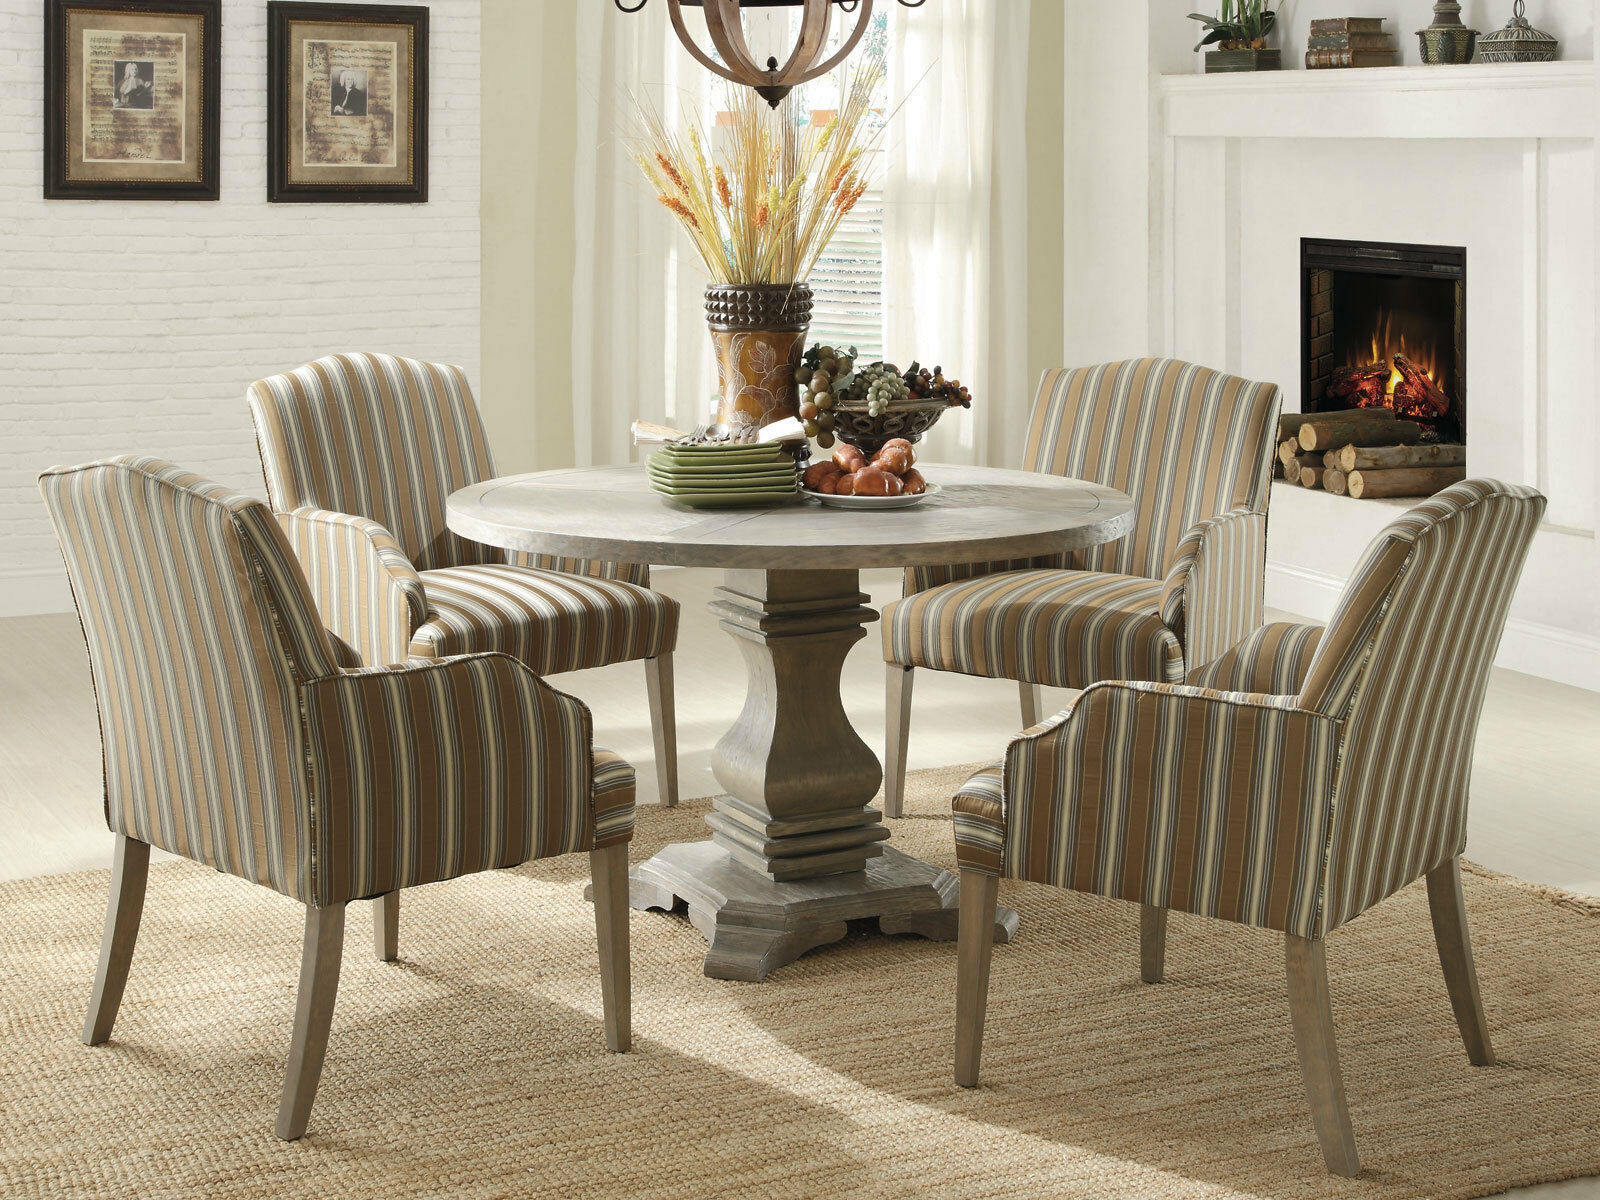 French Country 5 Piece Dining Room Sets